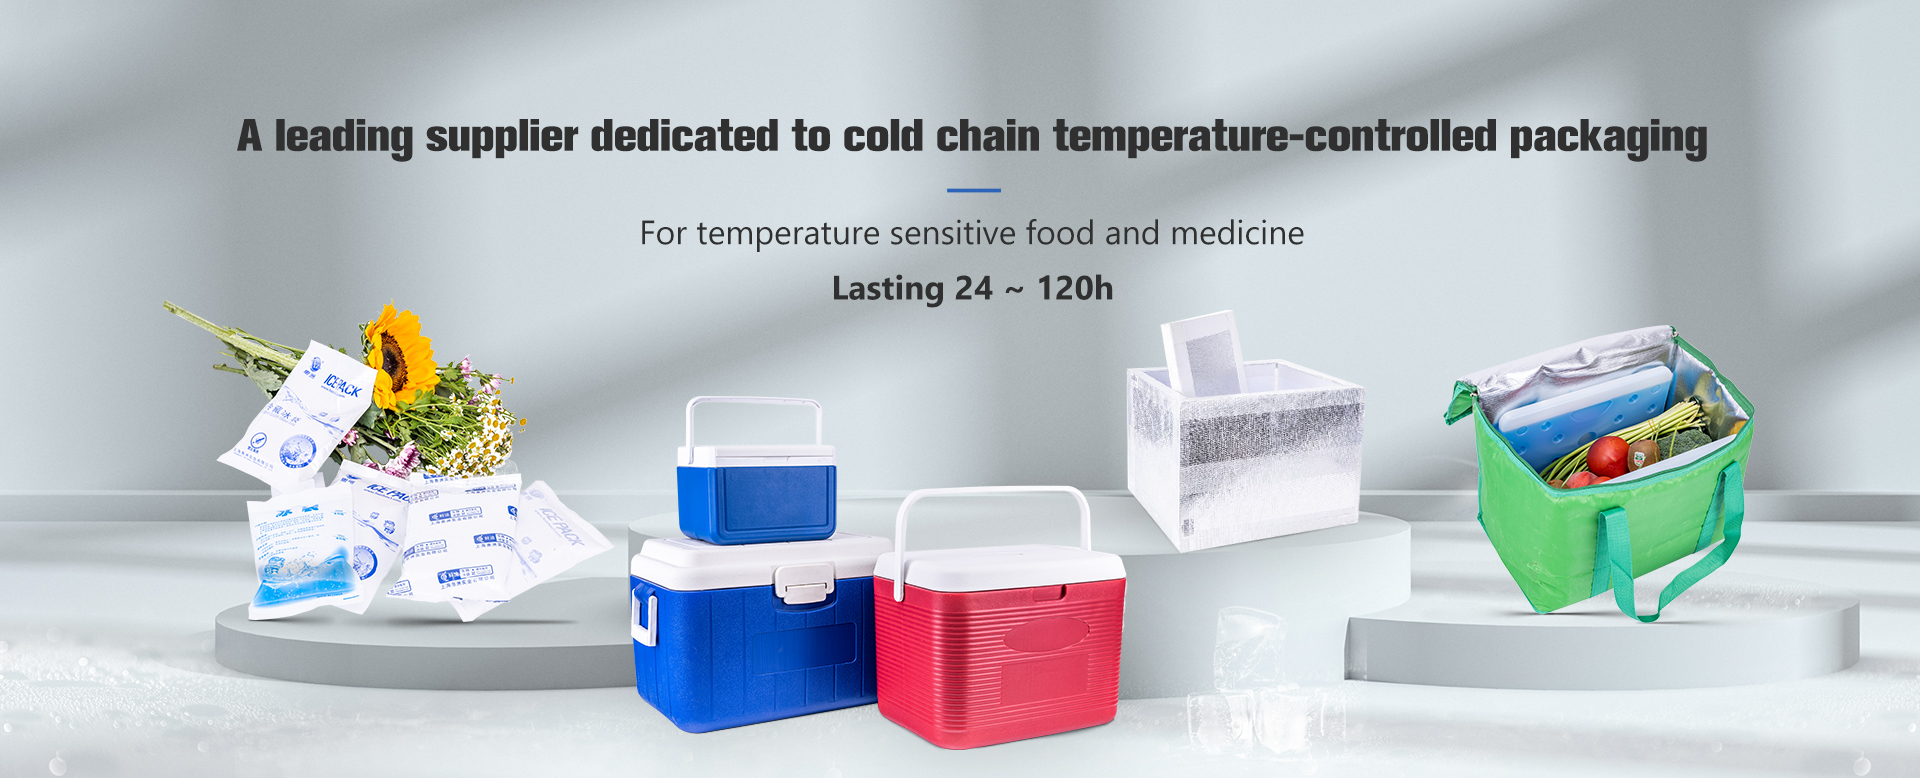 cold chain packaging manufacturer